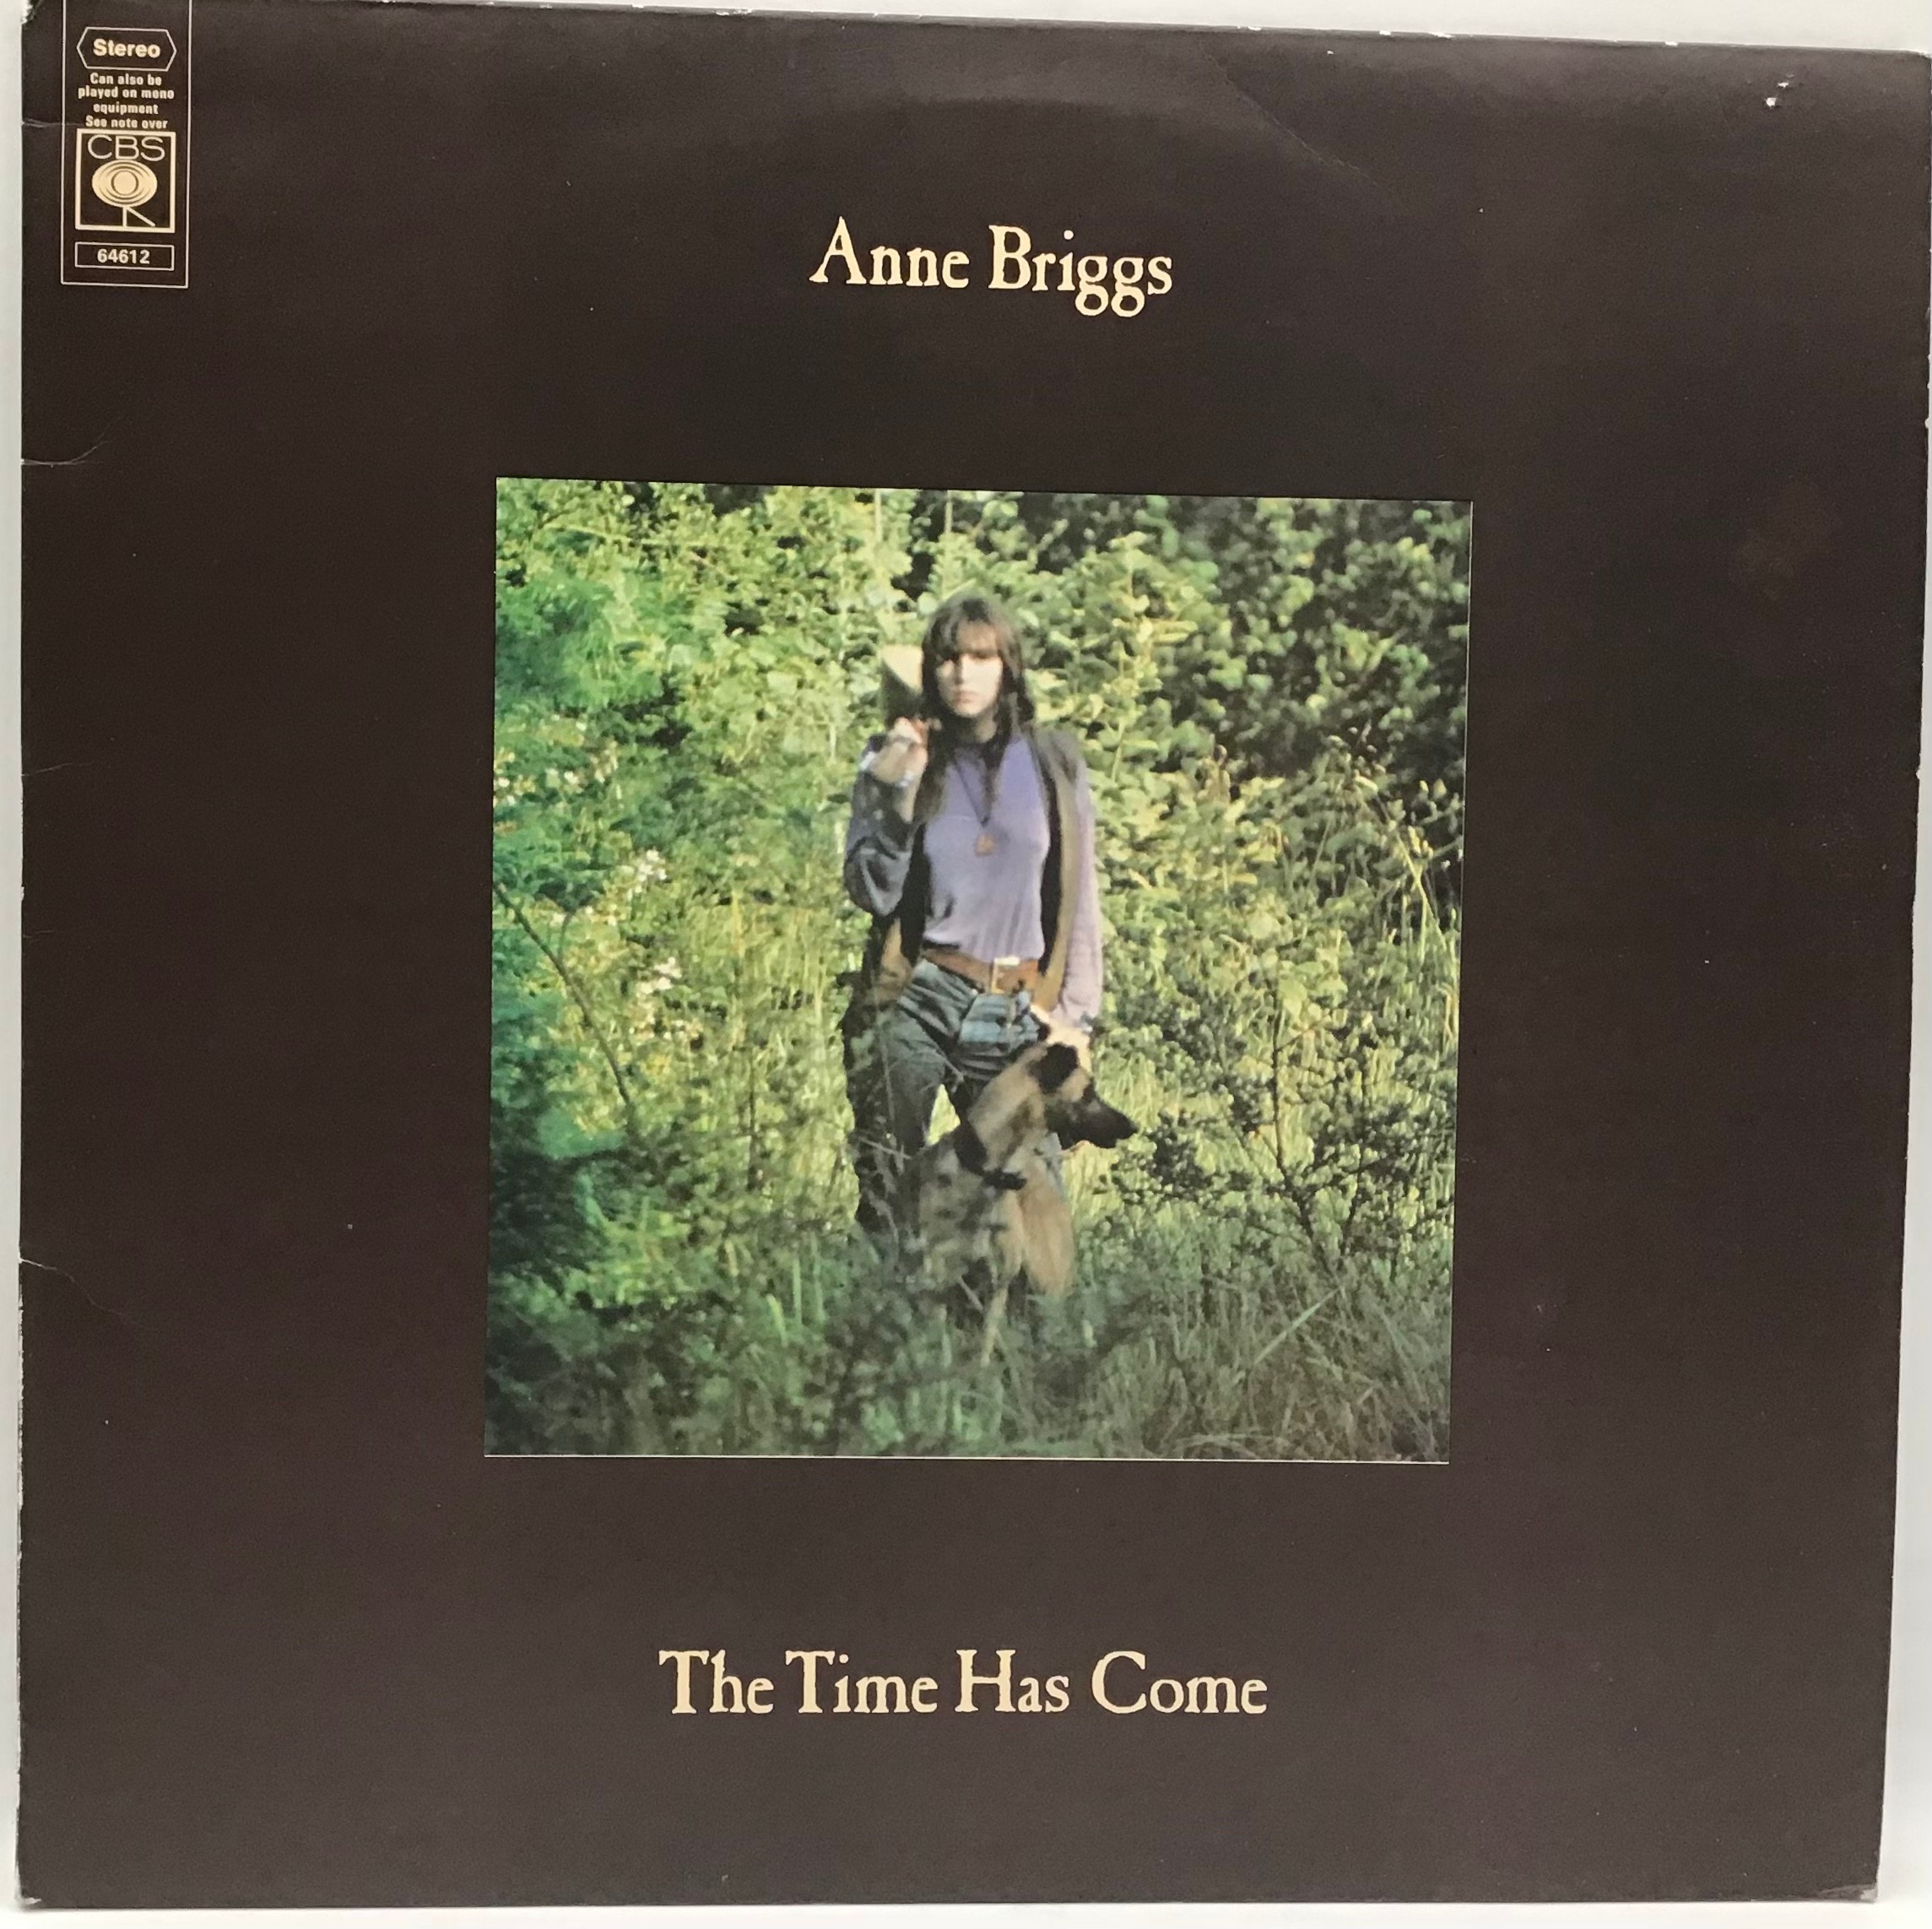 ANNE BRIGGS vinyl LP record ?The Time Has Come? UK 1st Press CBS S64612 from 1971. This folk album